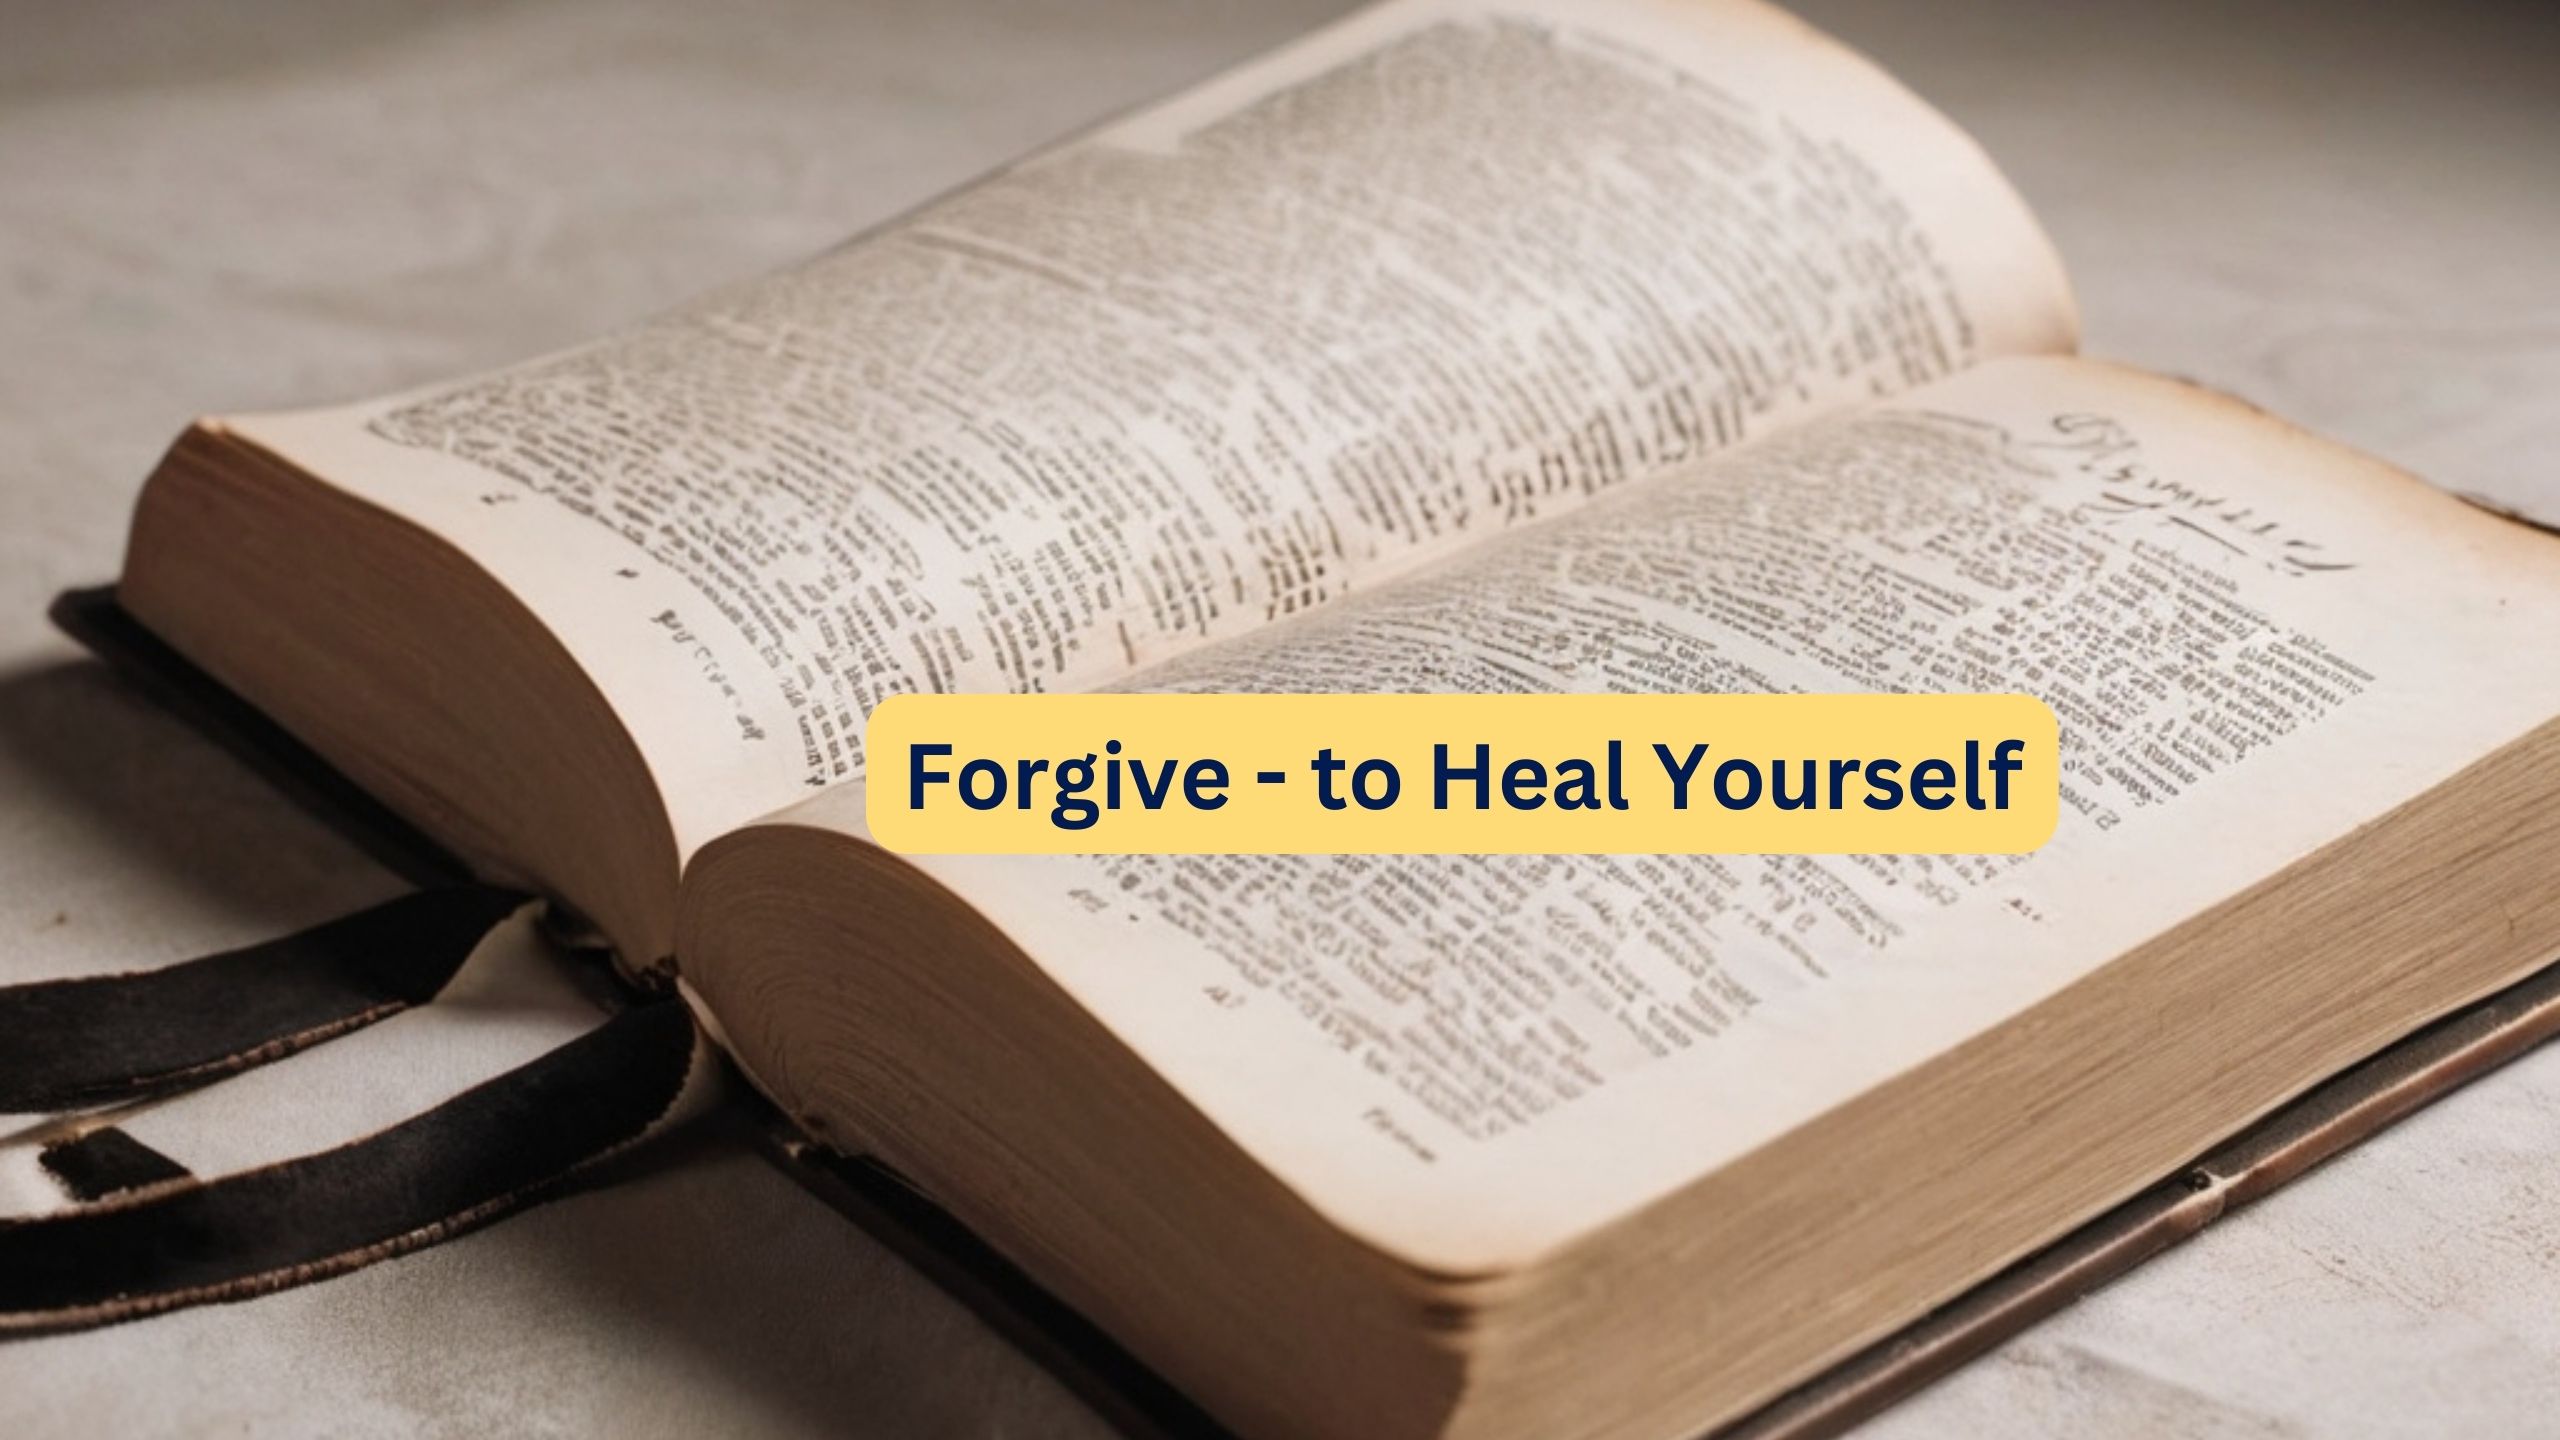 The Power of Forgiveness in the Bible